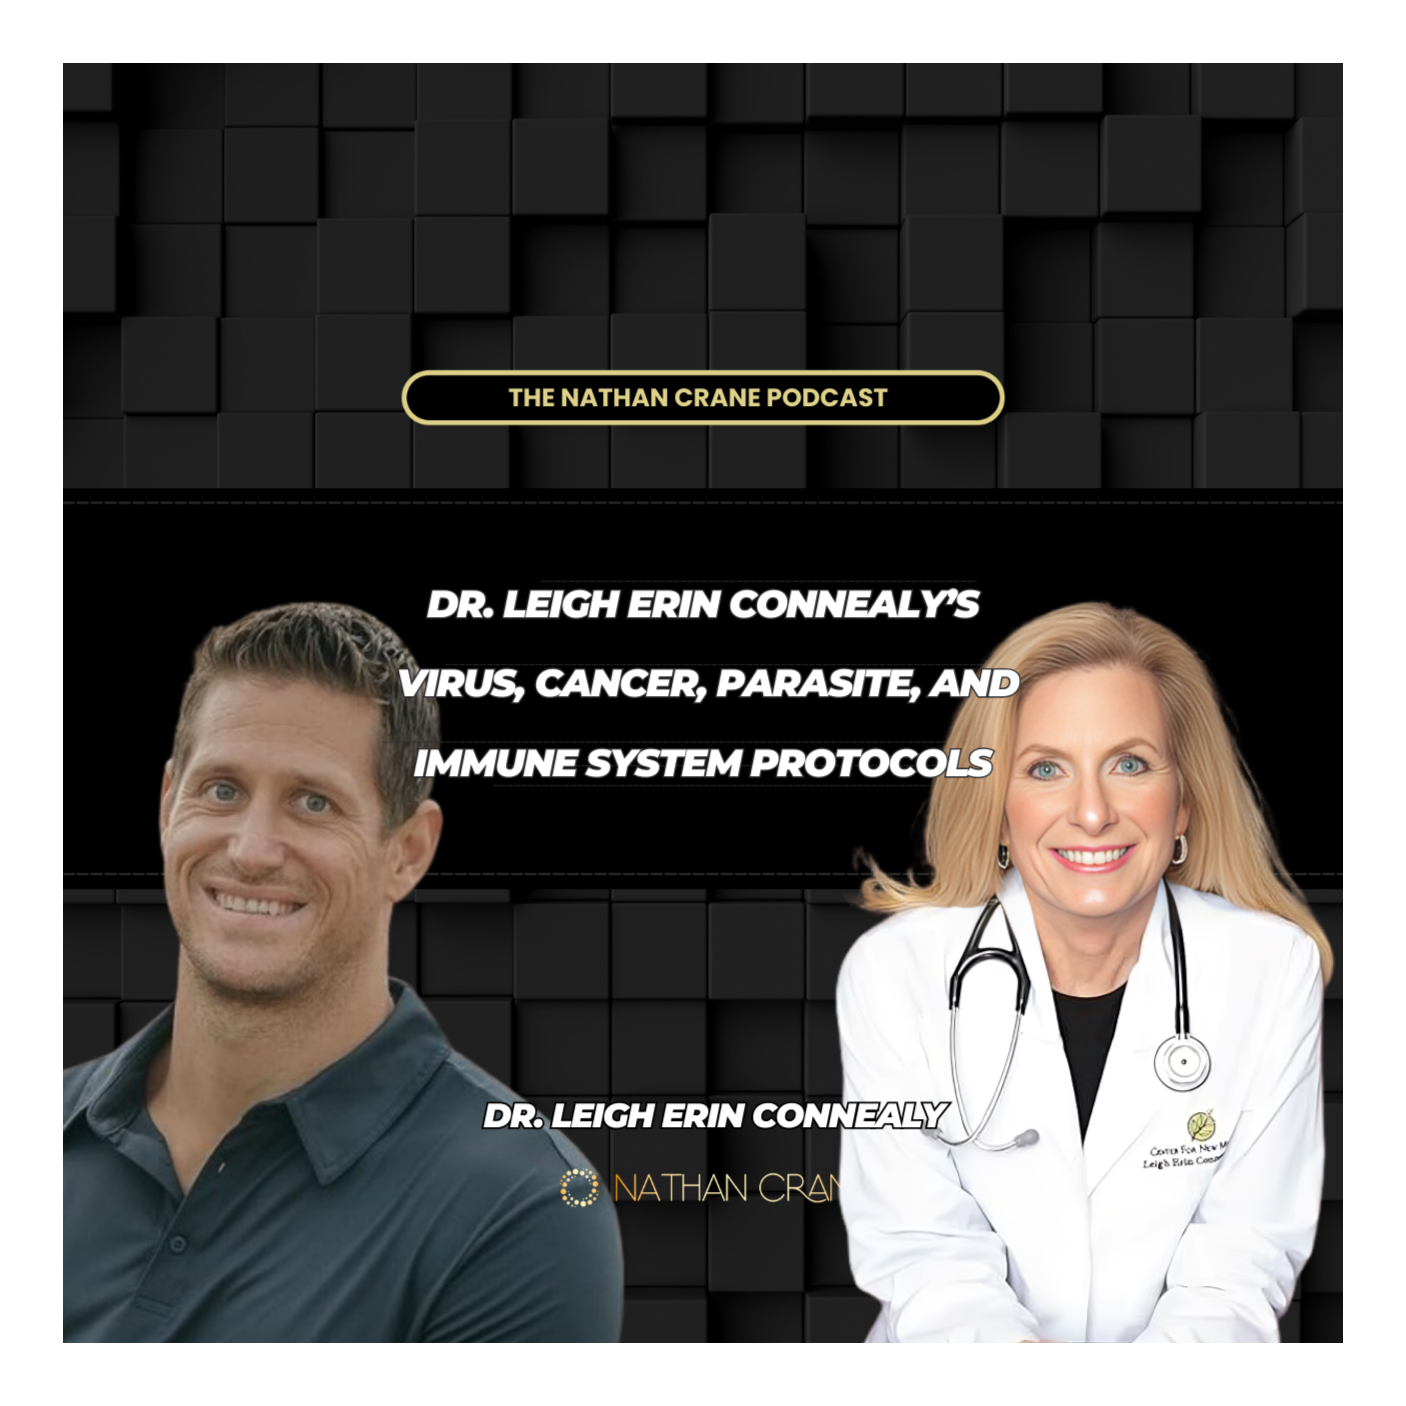 Dr. Leigh Erin Connealy’s Virus, Cancer, Parasite and Immune System Protocols | Nathan Crane Podcast